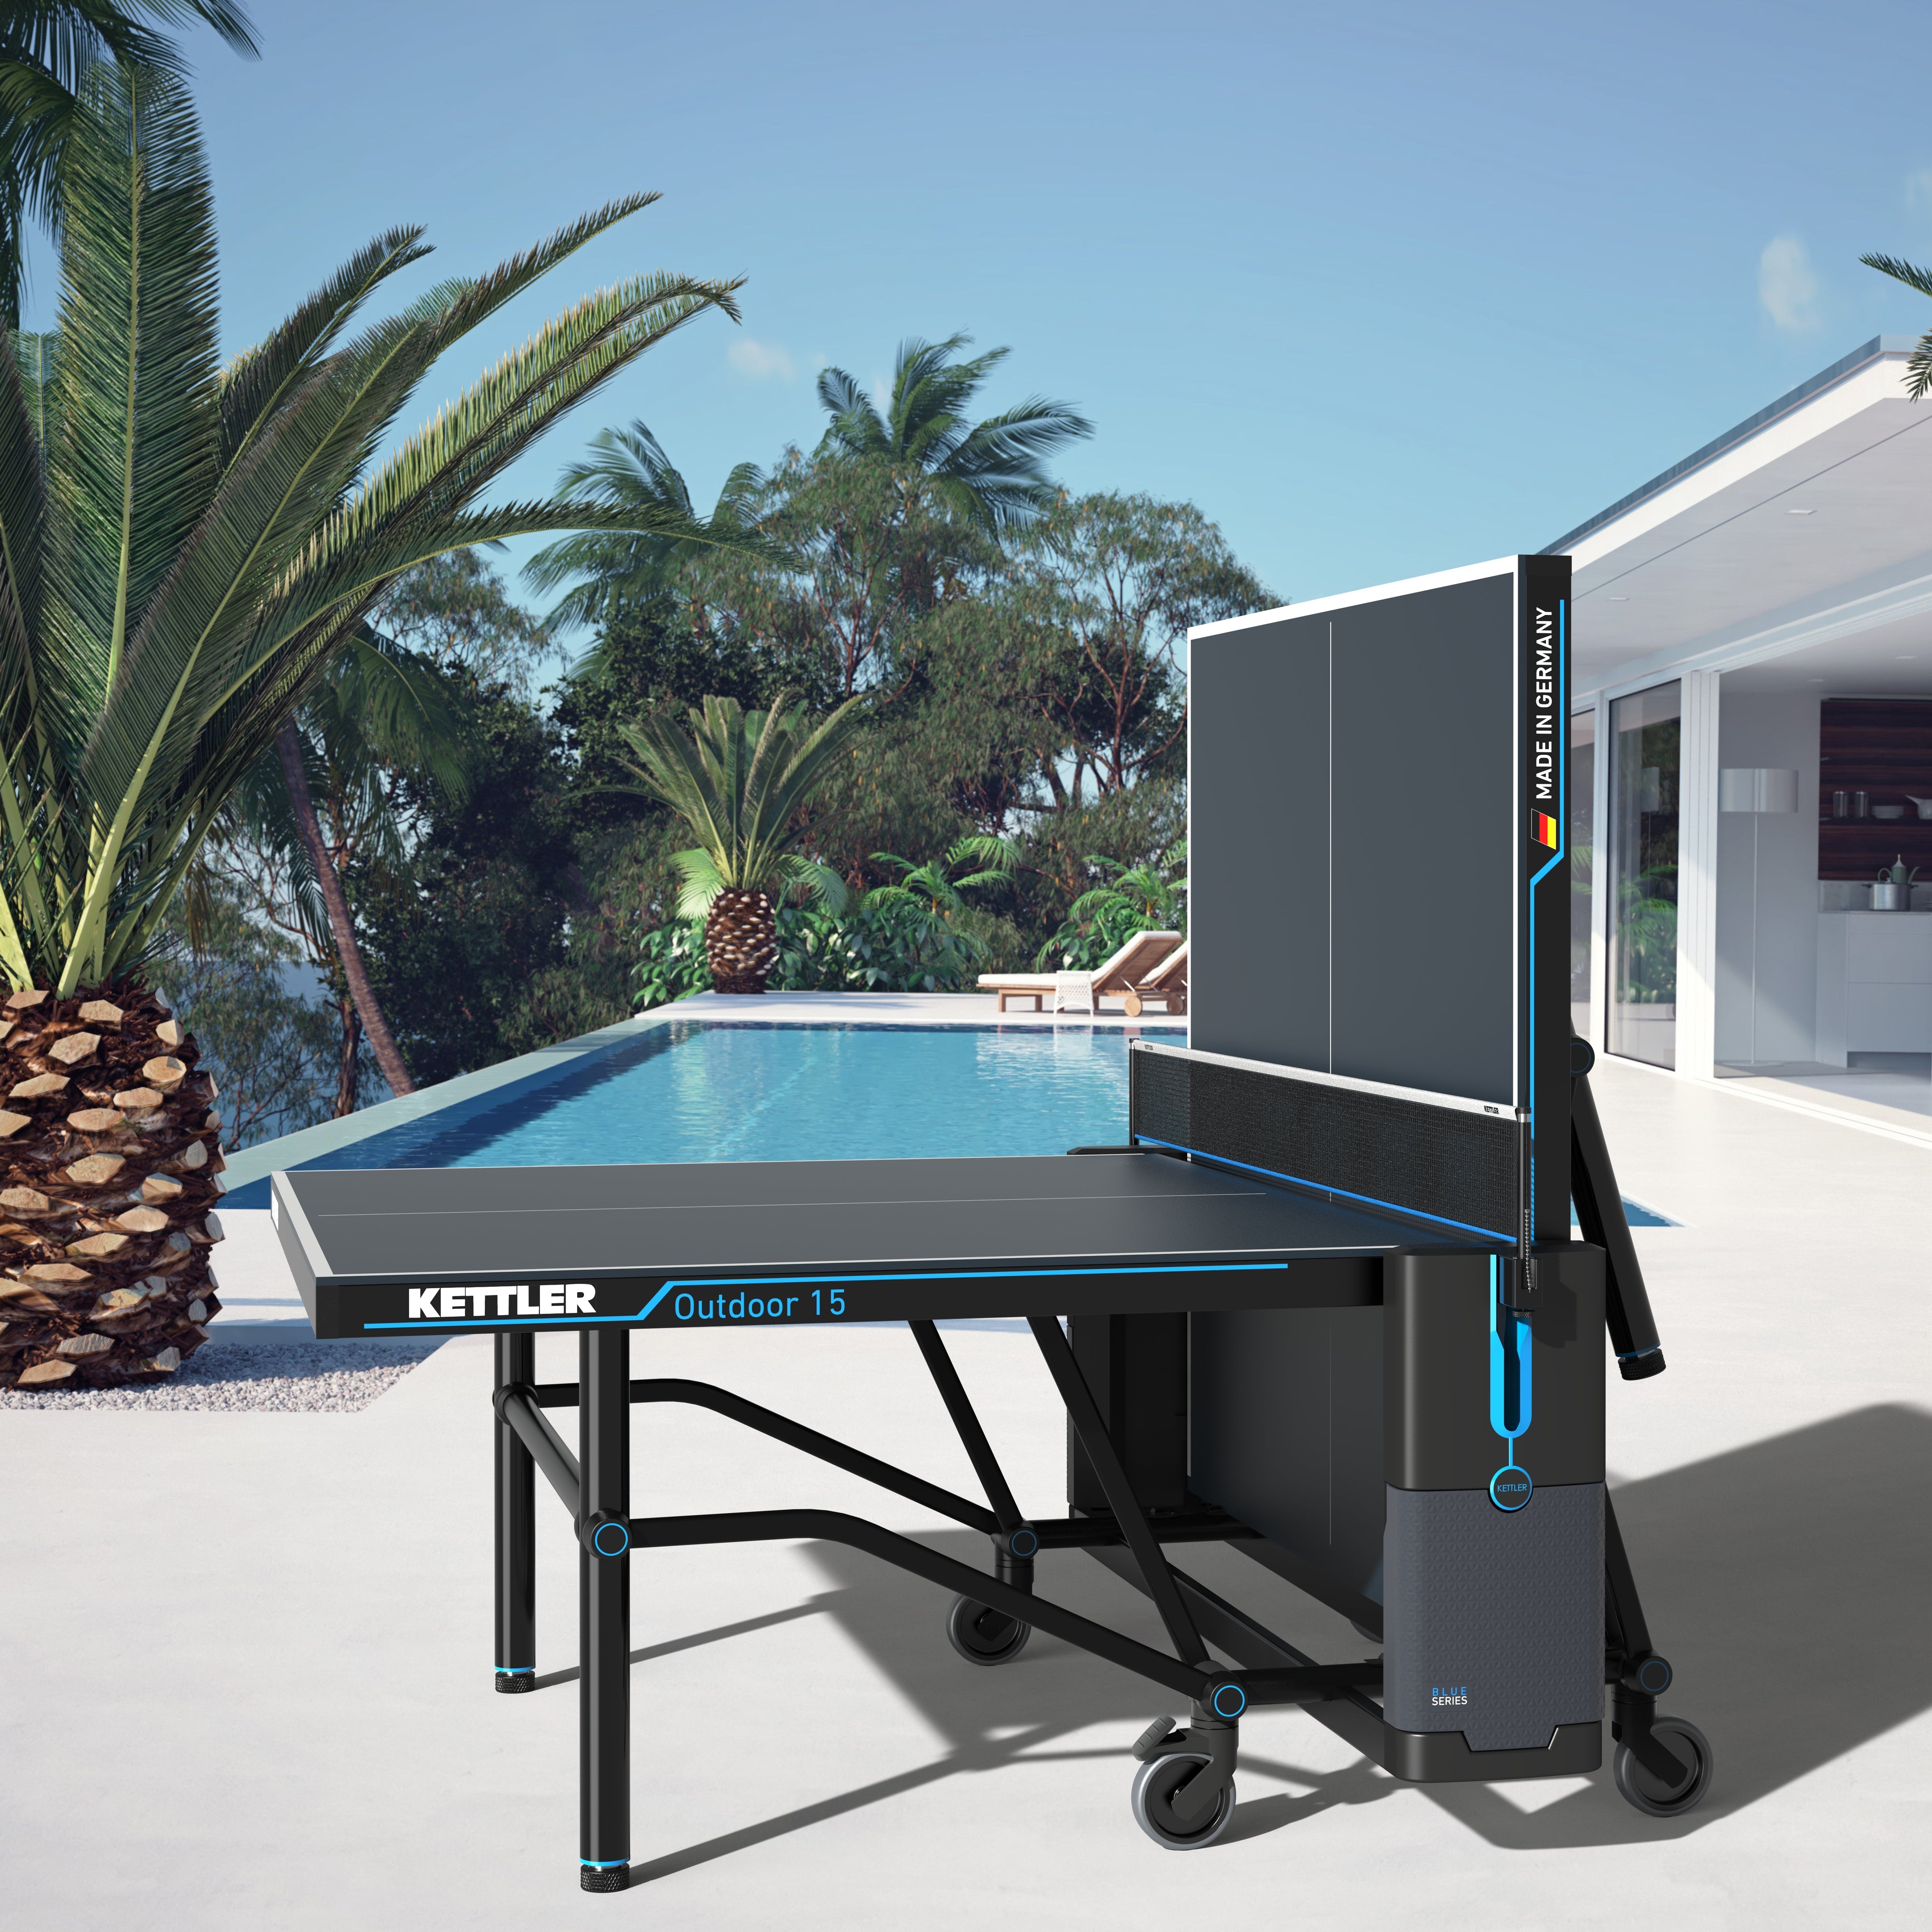 High quality outdoor table tennis table poolside